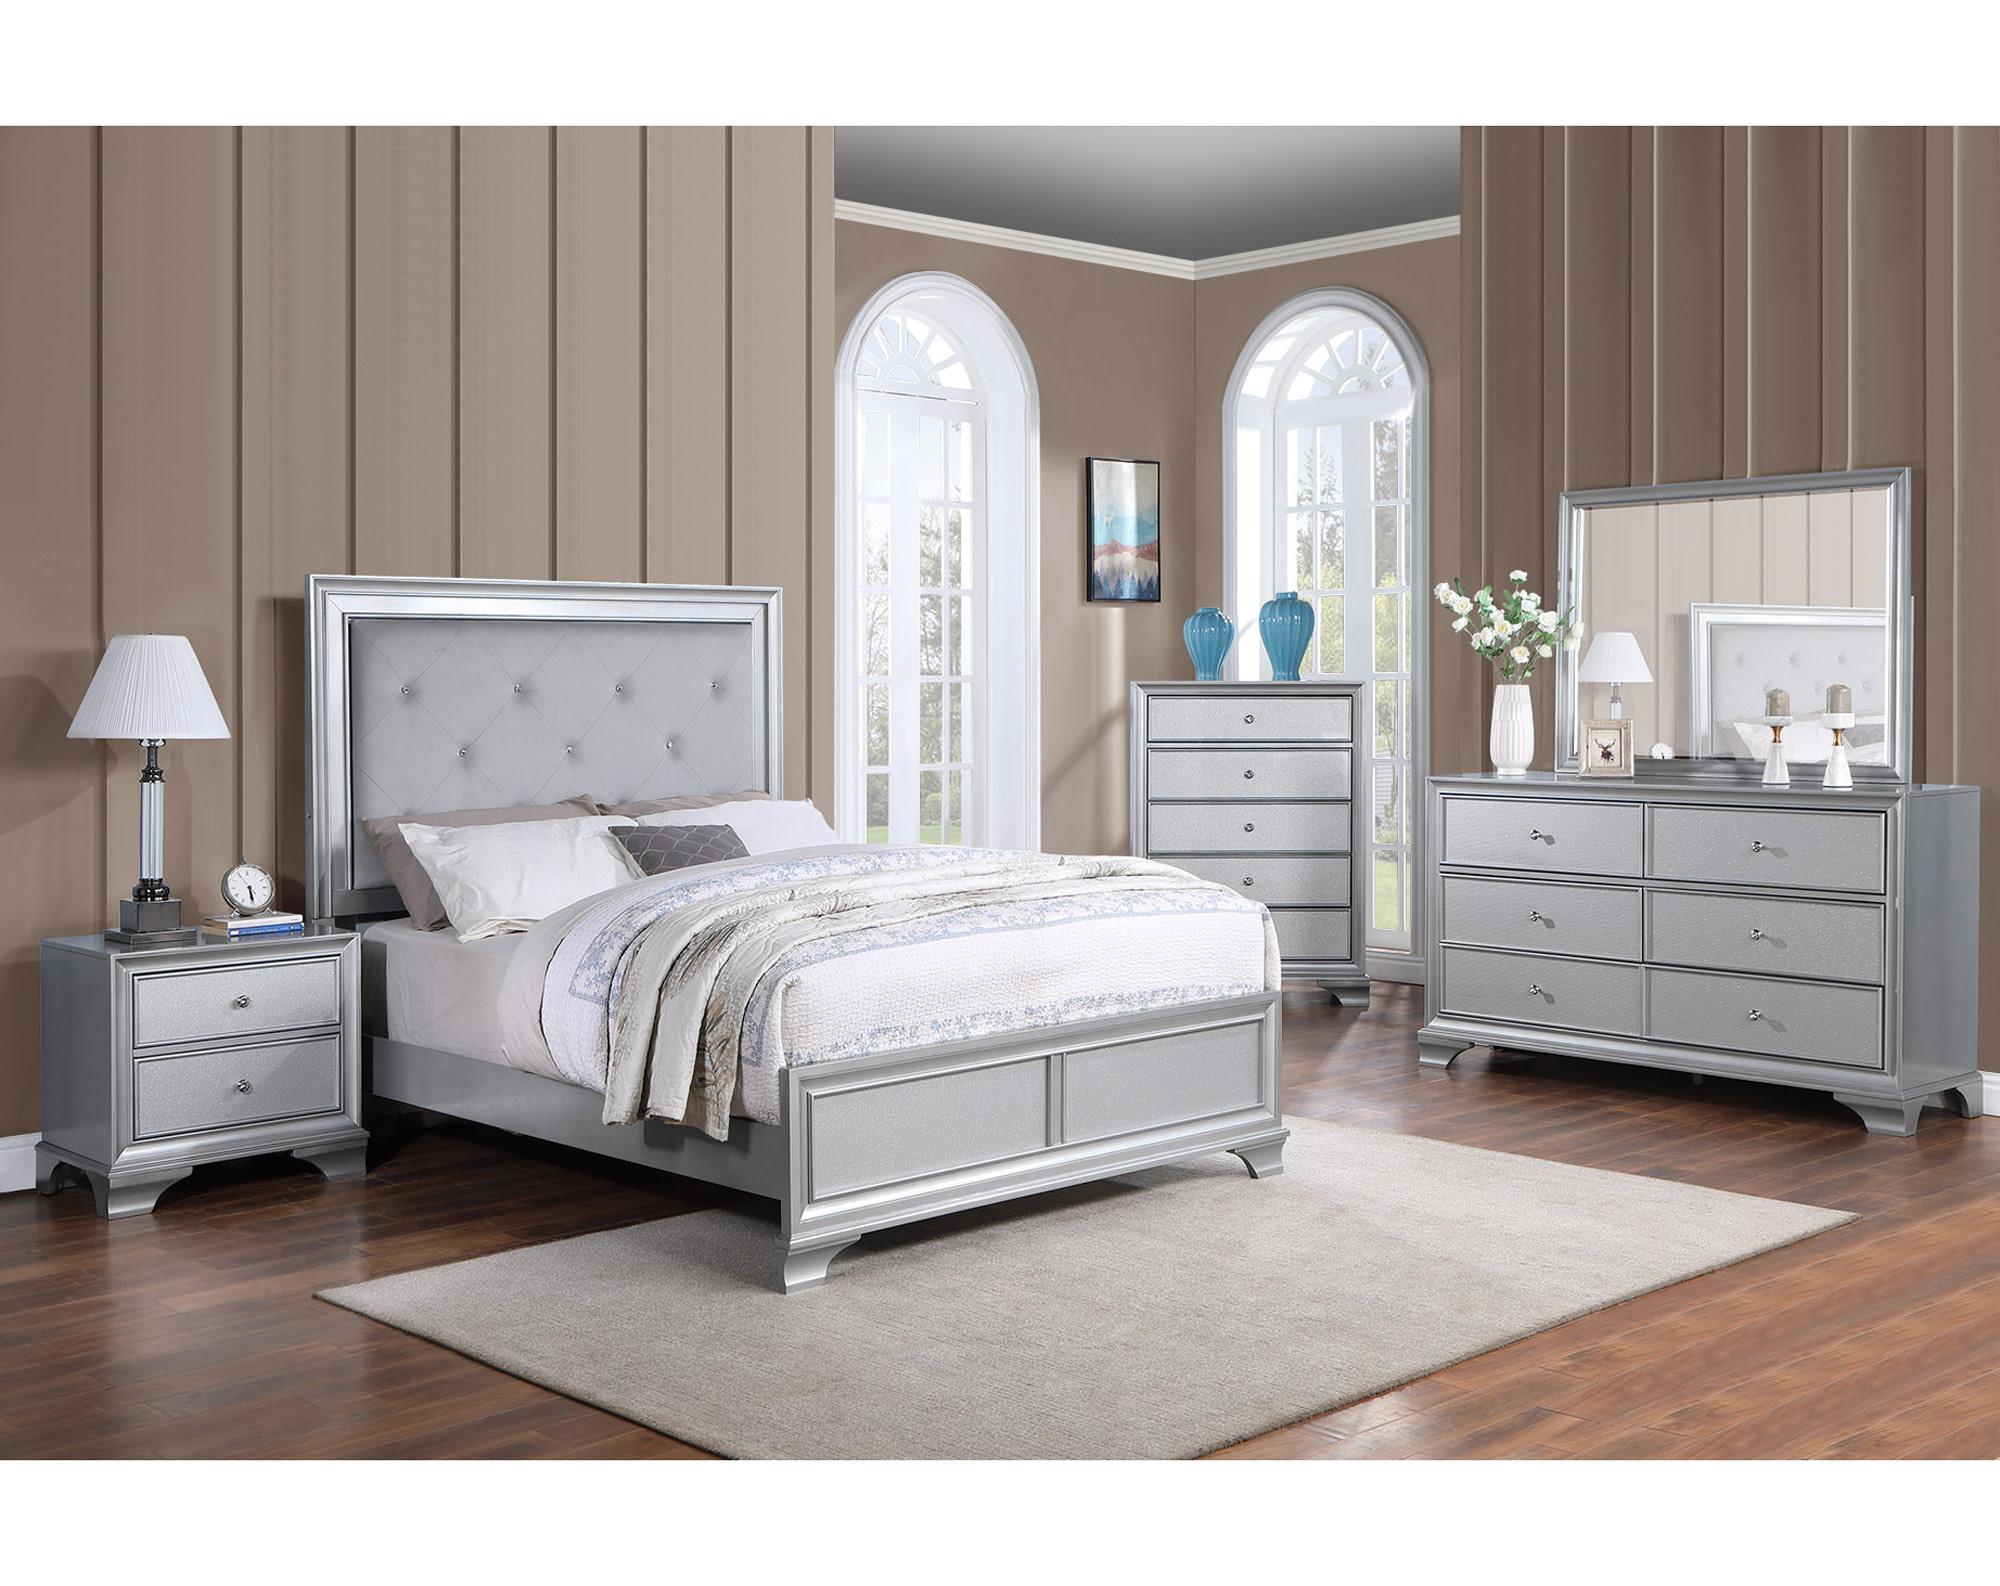 Gemma Silver Bedroom Collection AF lifestyle picture